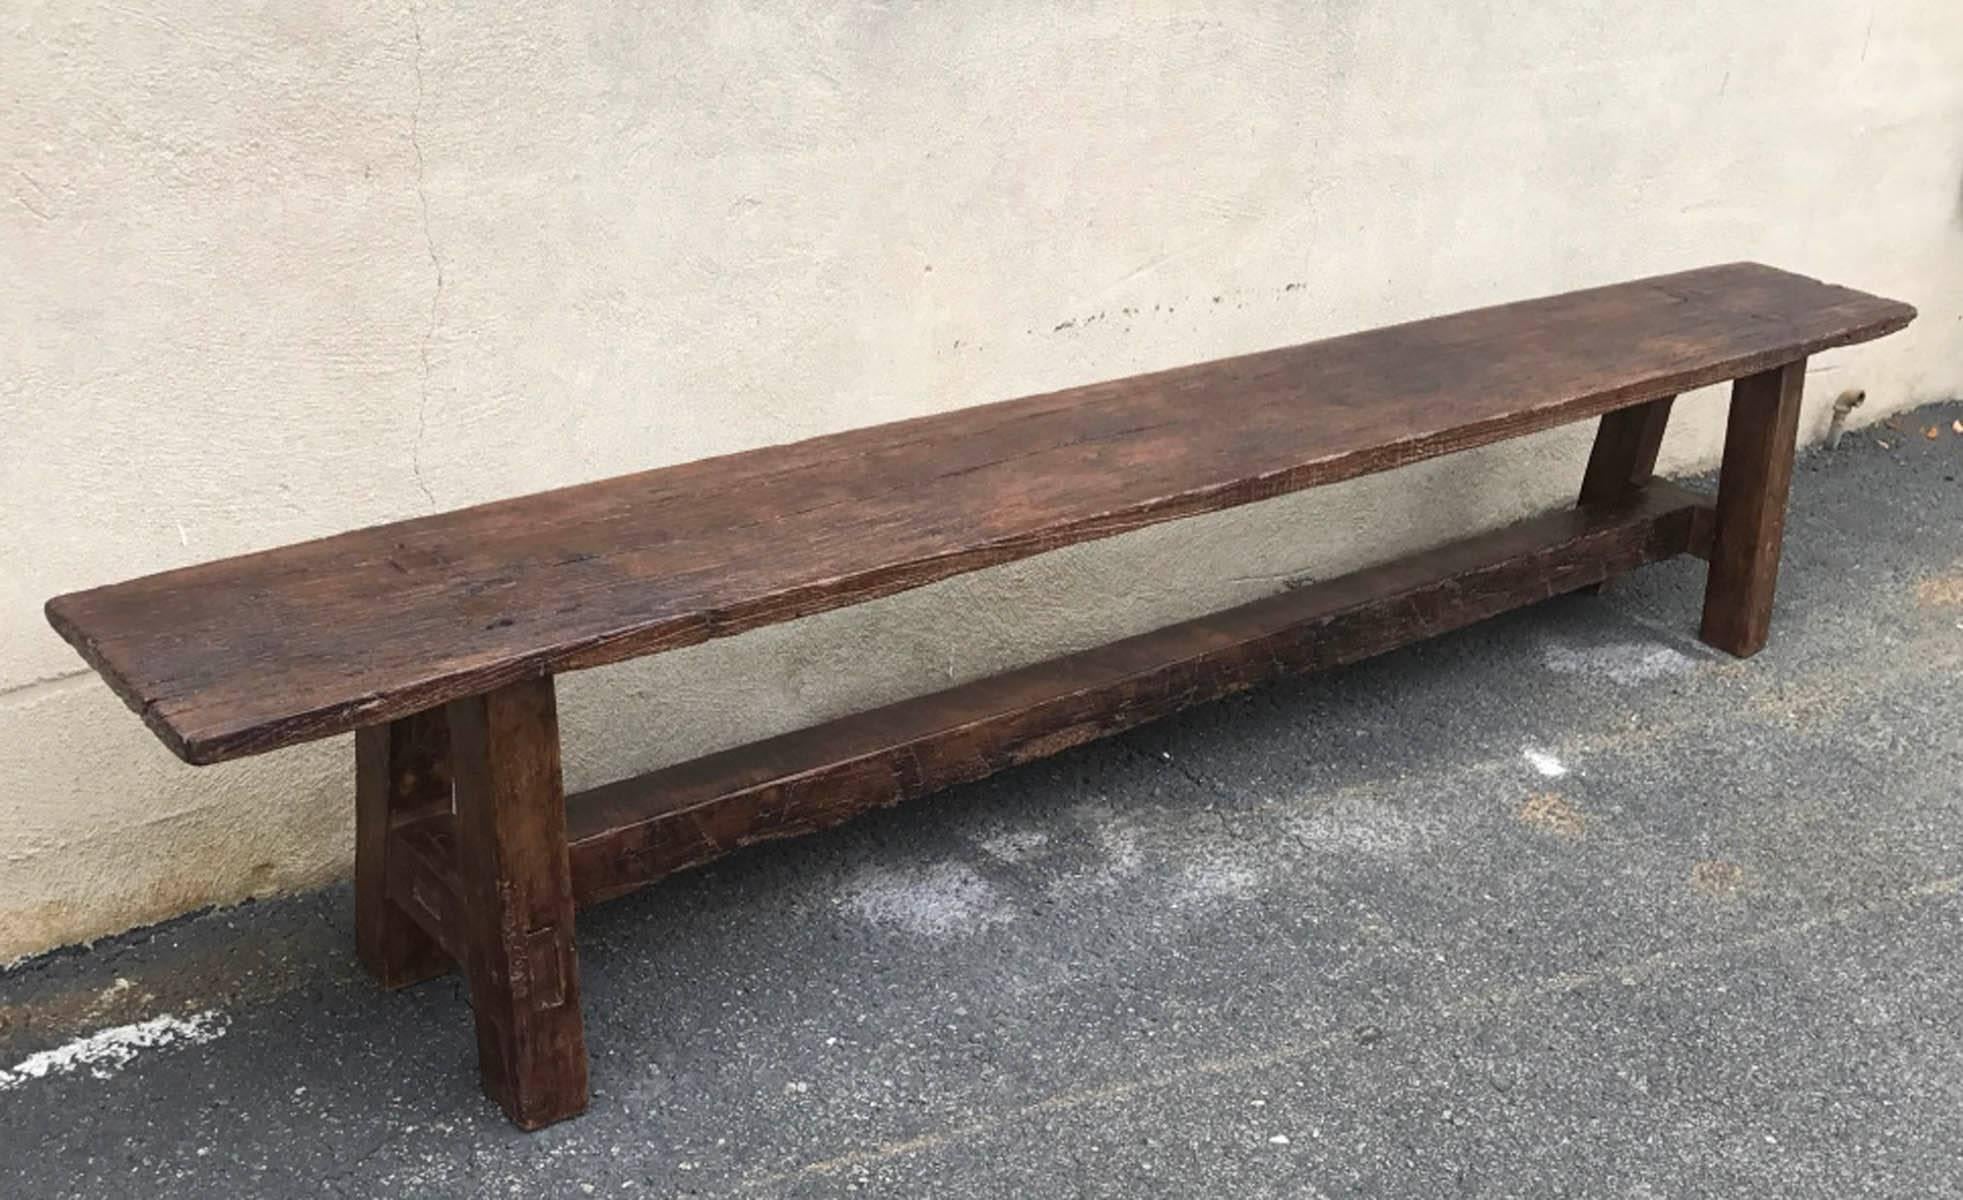 Very old wooden bench. Parts of the base has been replaced over the years, which is normal for this type of piece. Old repairs. Mortise and tenon construction, straight Primitive legs. Natural worn patina.